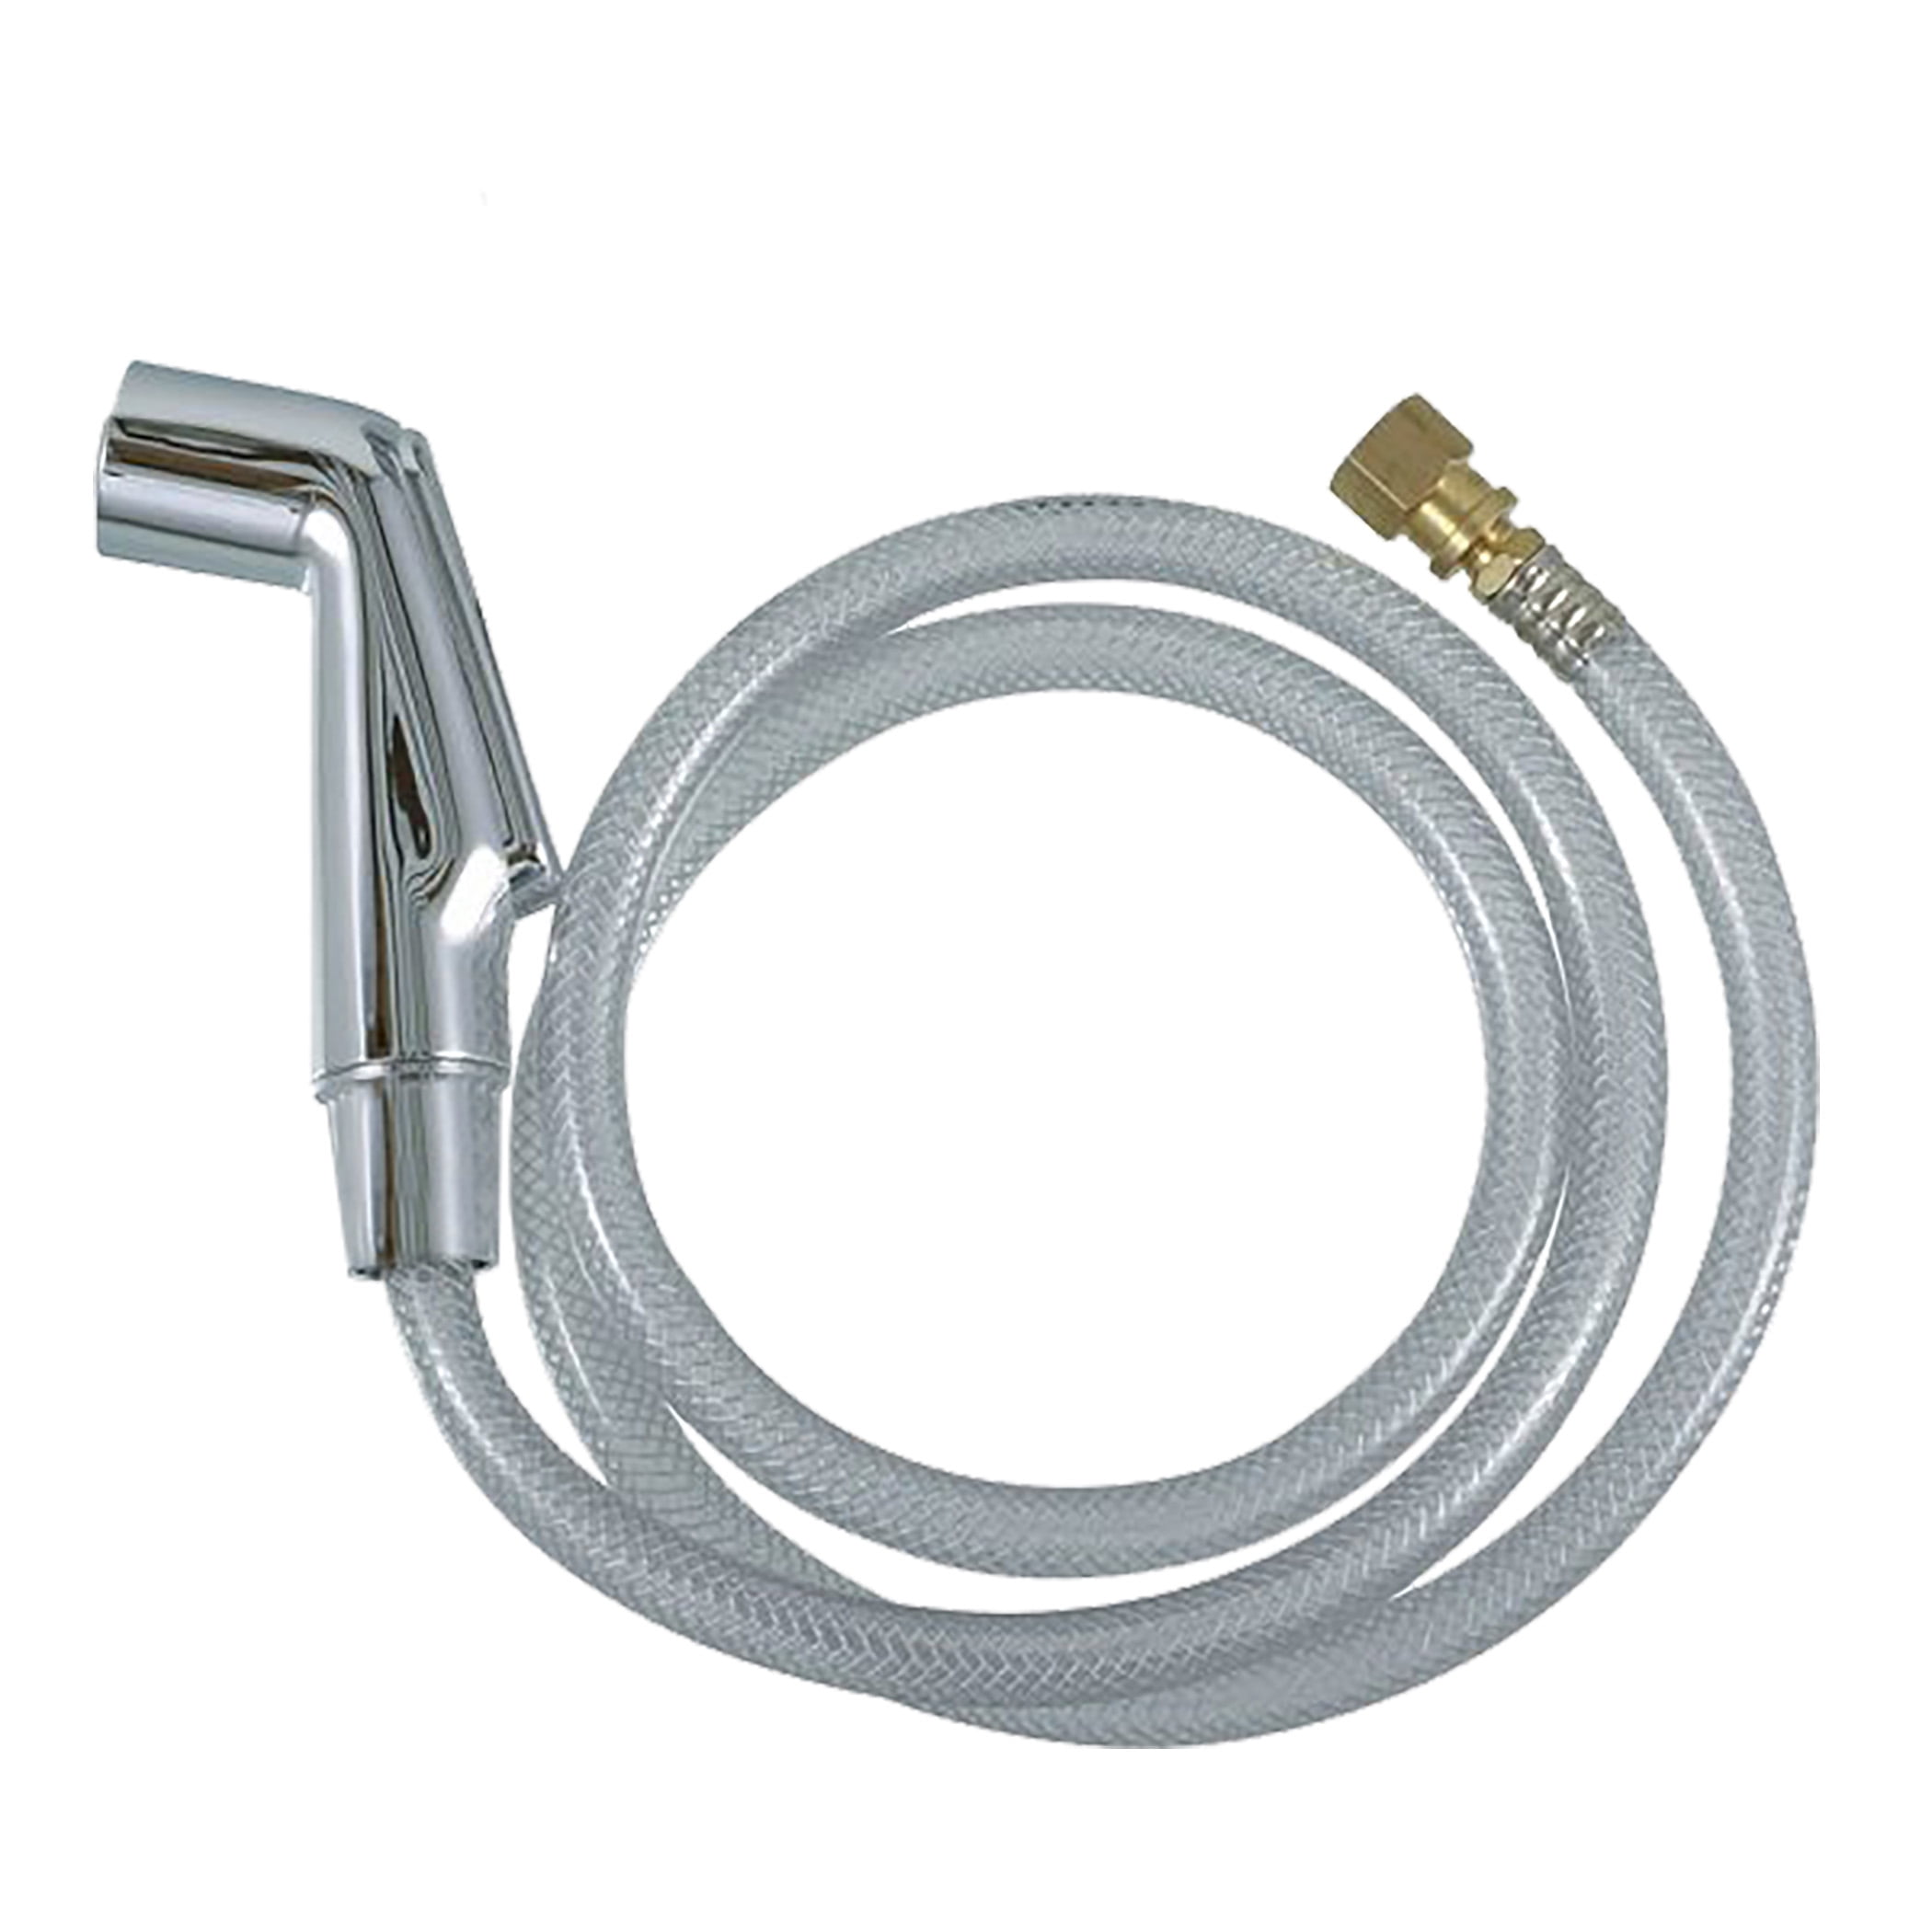 Mainstays Kitchen Sink Spray 48 inch Hose and Head in Chrome, 0.51 lbs  Weight (88814) 